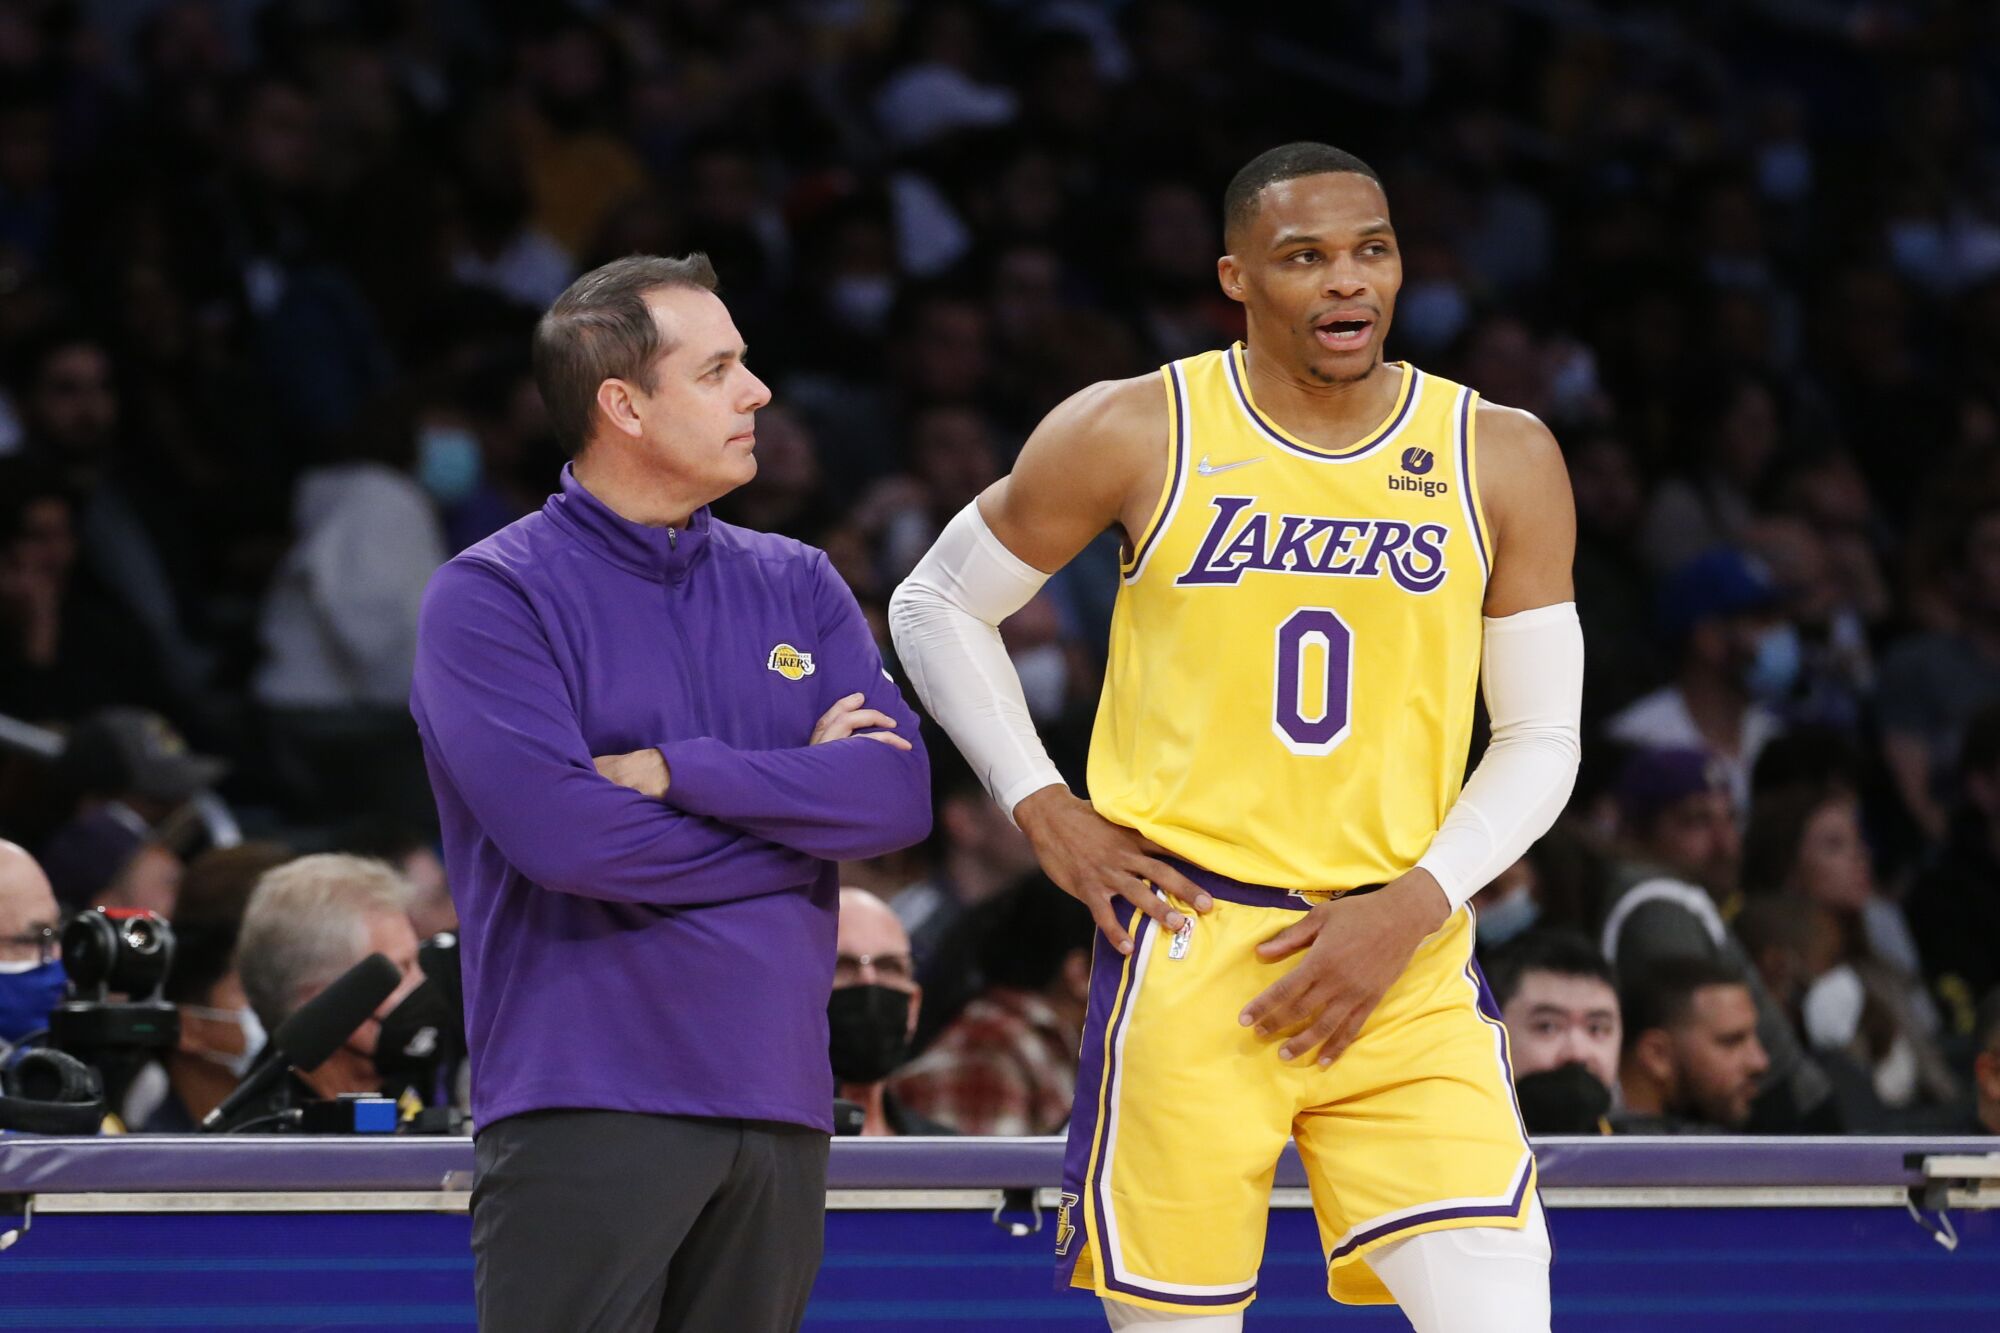 Lakers coach Frank Vogel confers with guard Russell Westbrook along the sideline.